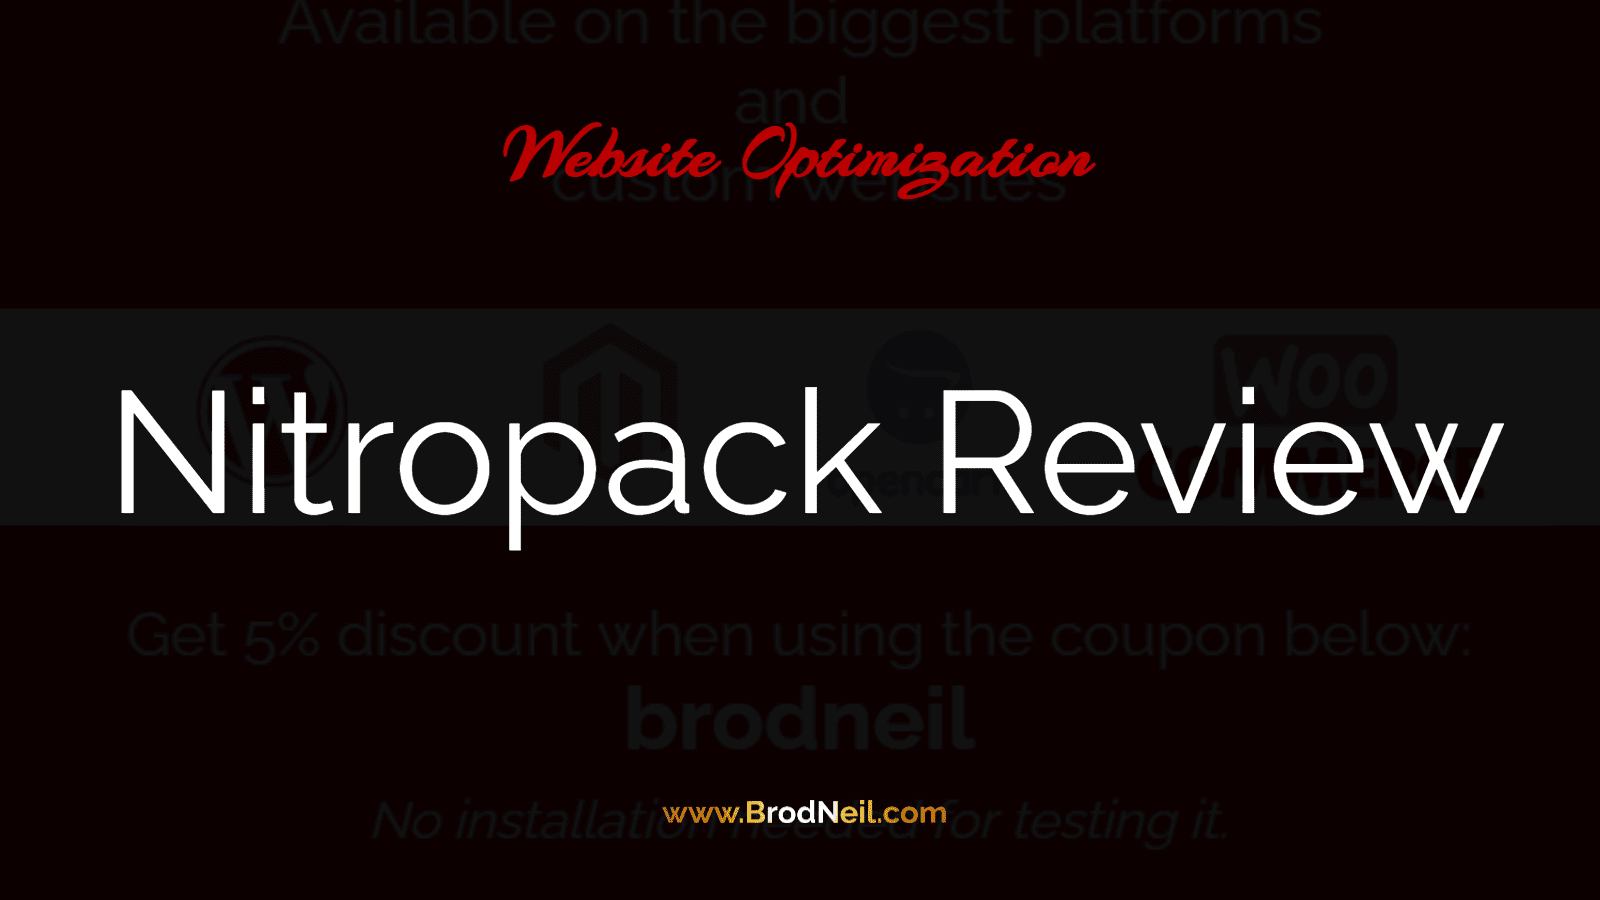 Nitropack Review